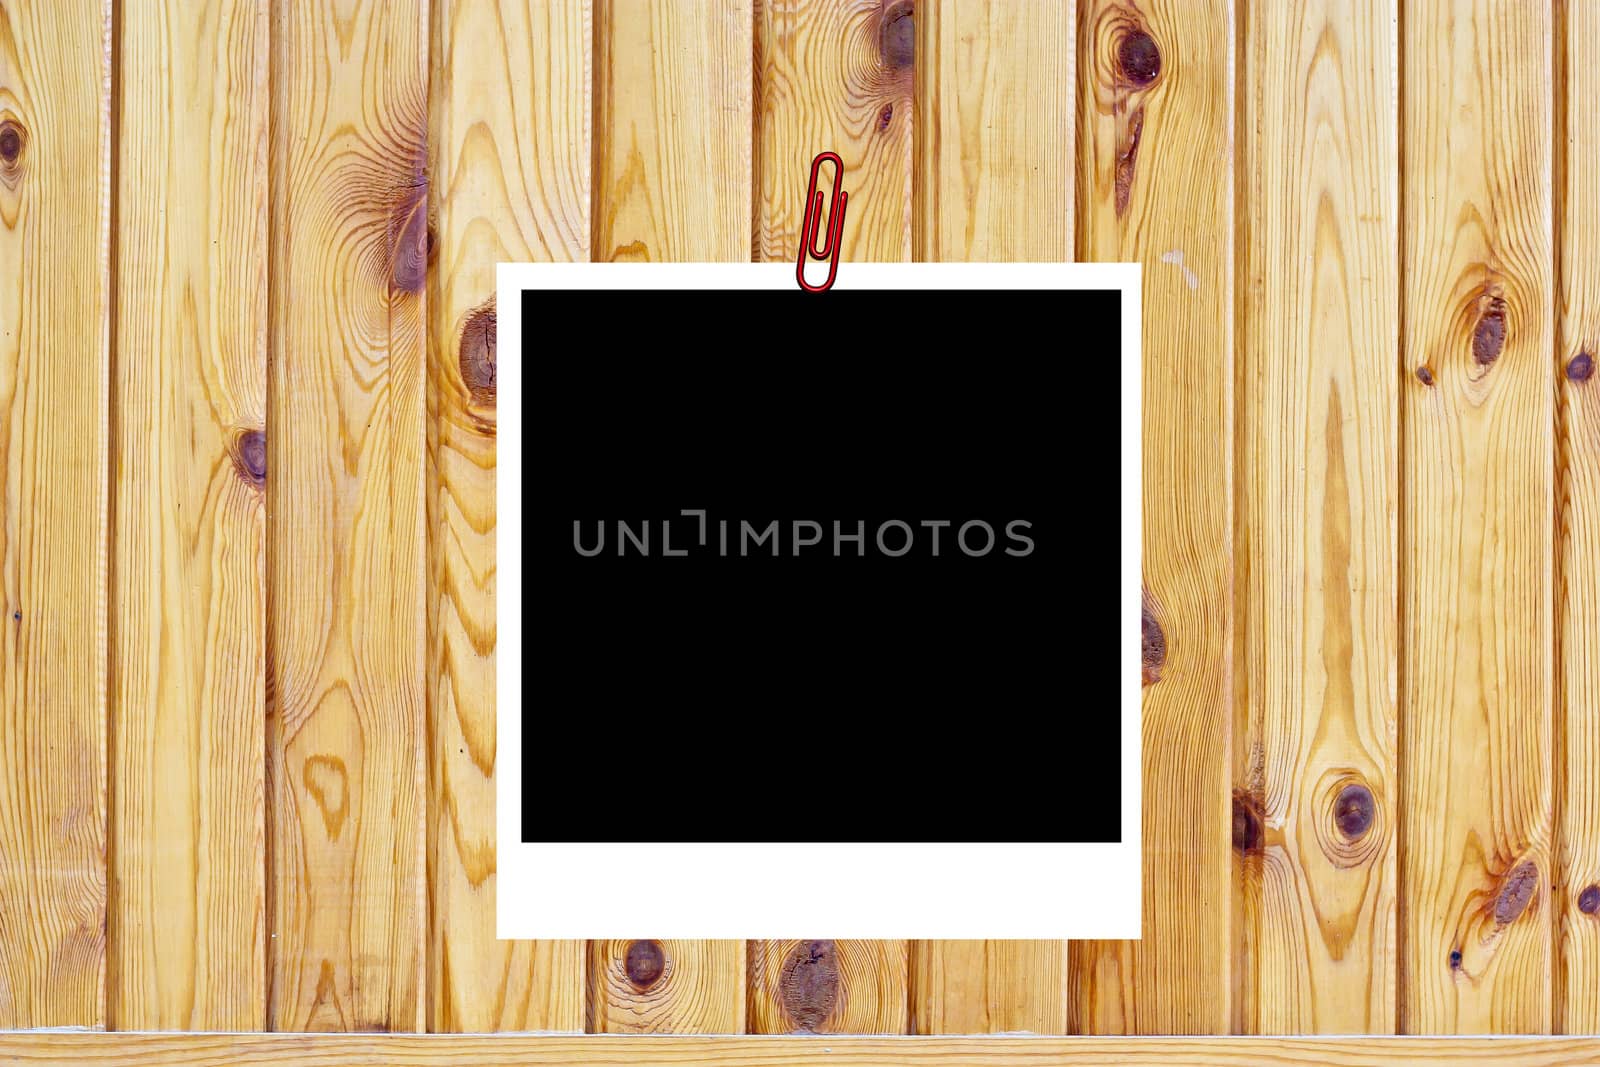 Wooden background of the harvest with frame by schankz